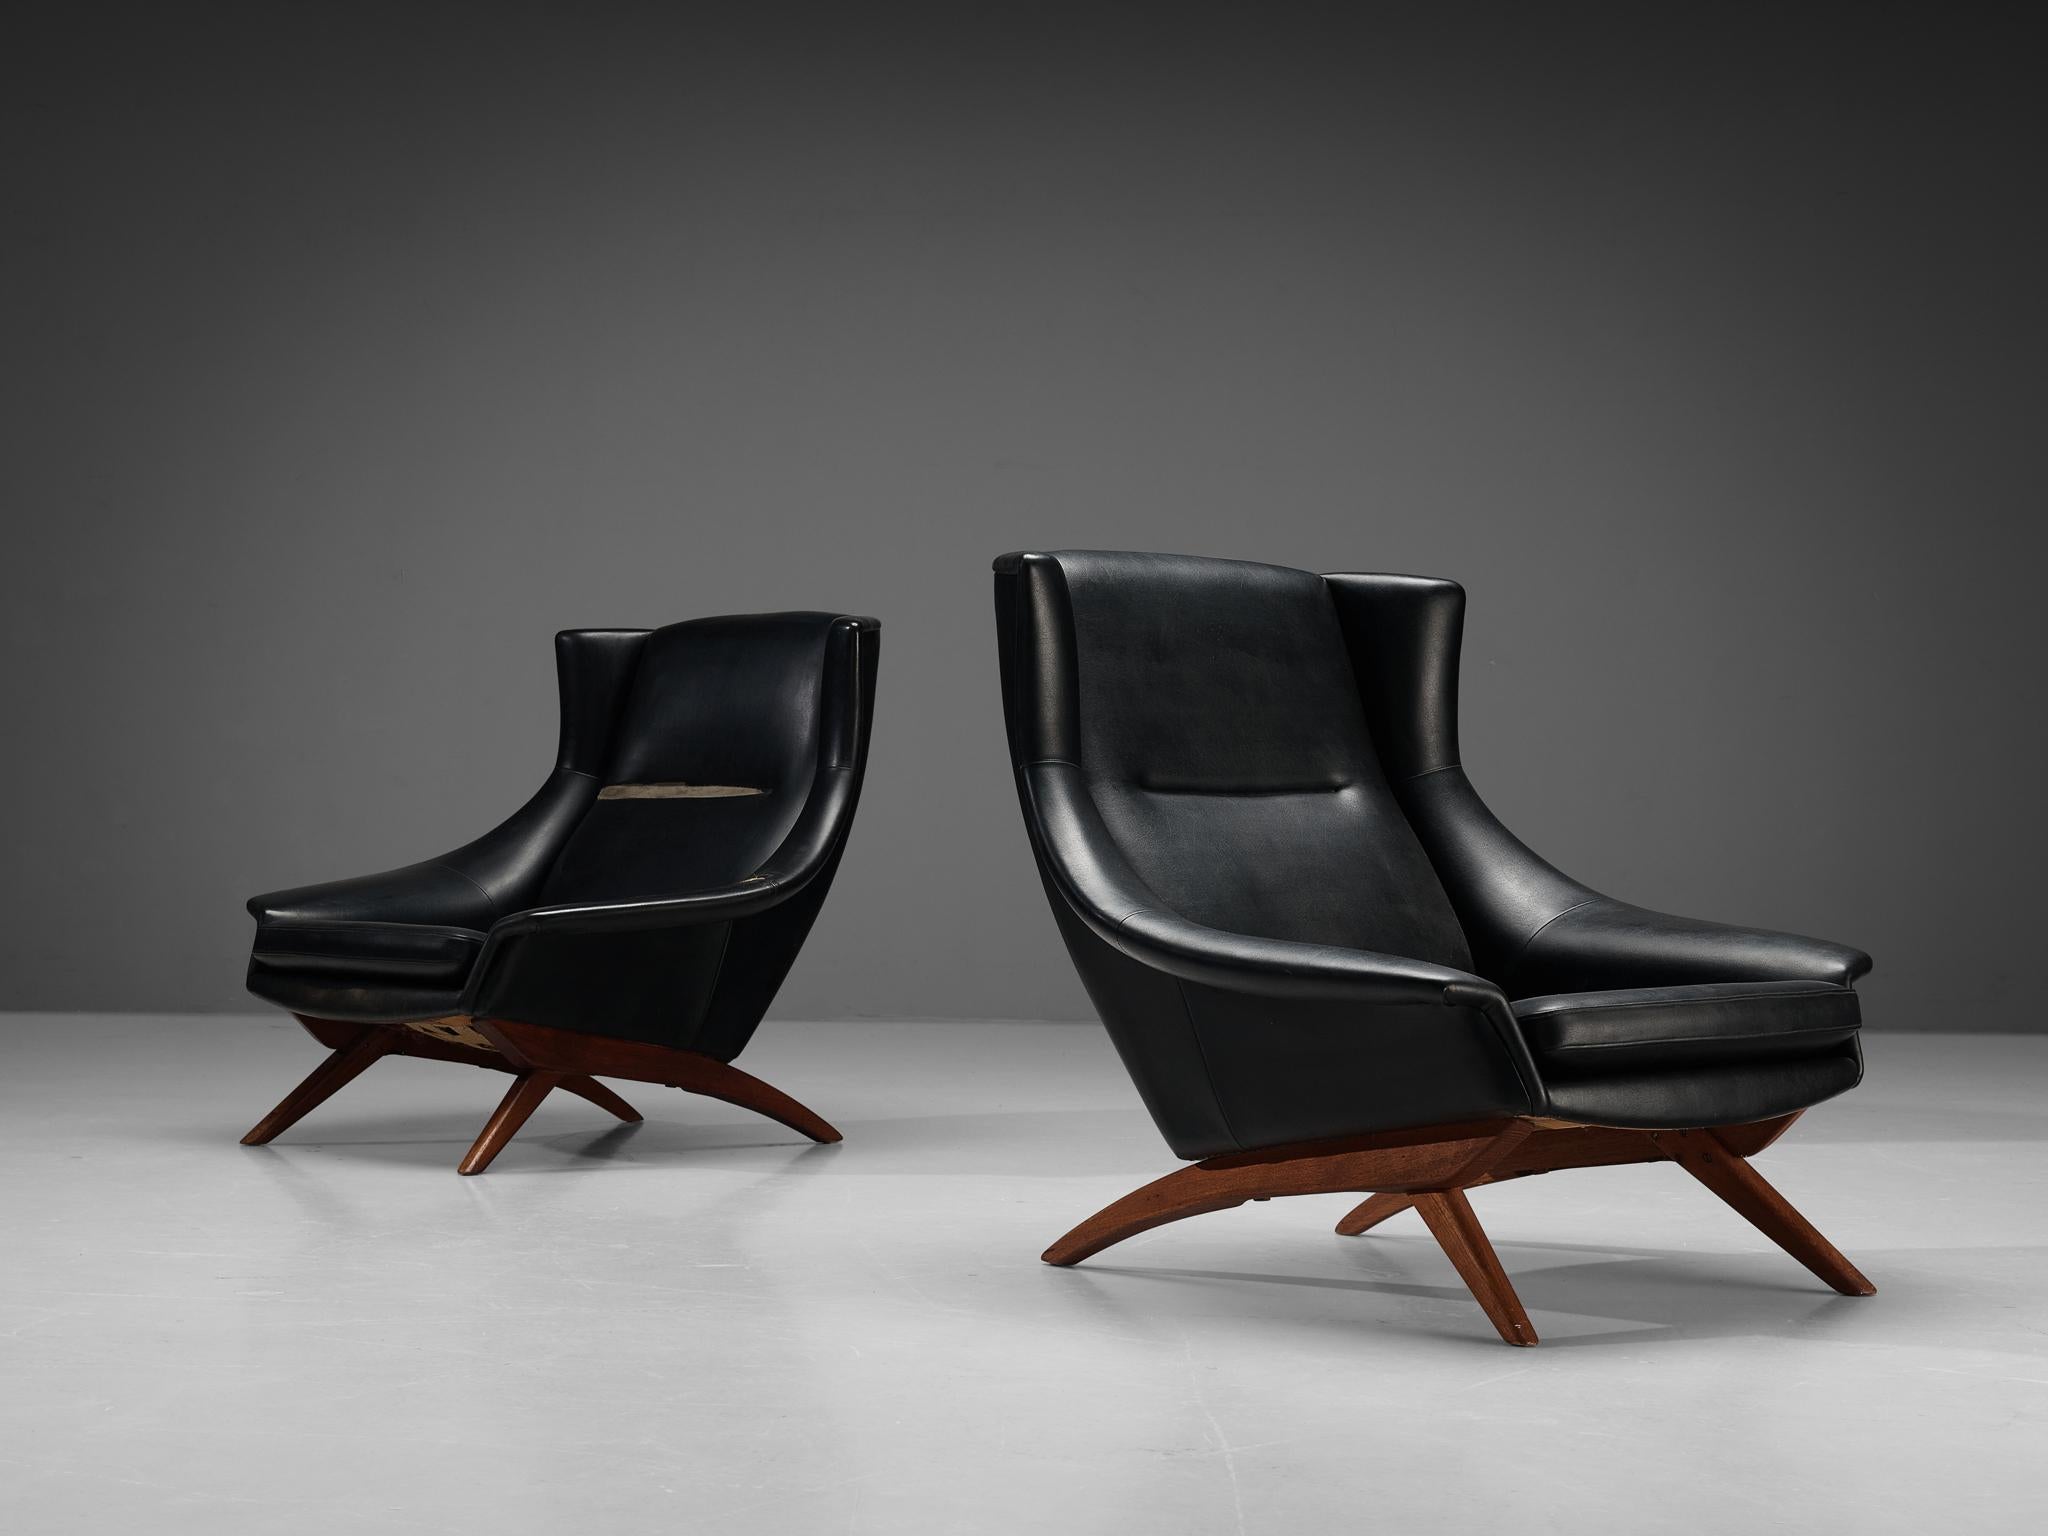 Lounge chairs, oak, leather, Denmark, 1960s.

These lounge chairs were designed in Denmark and shows great similarities with the designs of Illum Wikkelsø. These lounge chairs are comfortable and shows playful details. The chair bends slightly